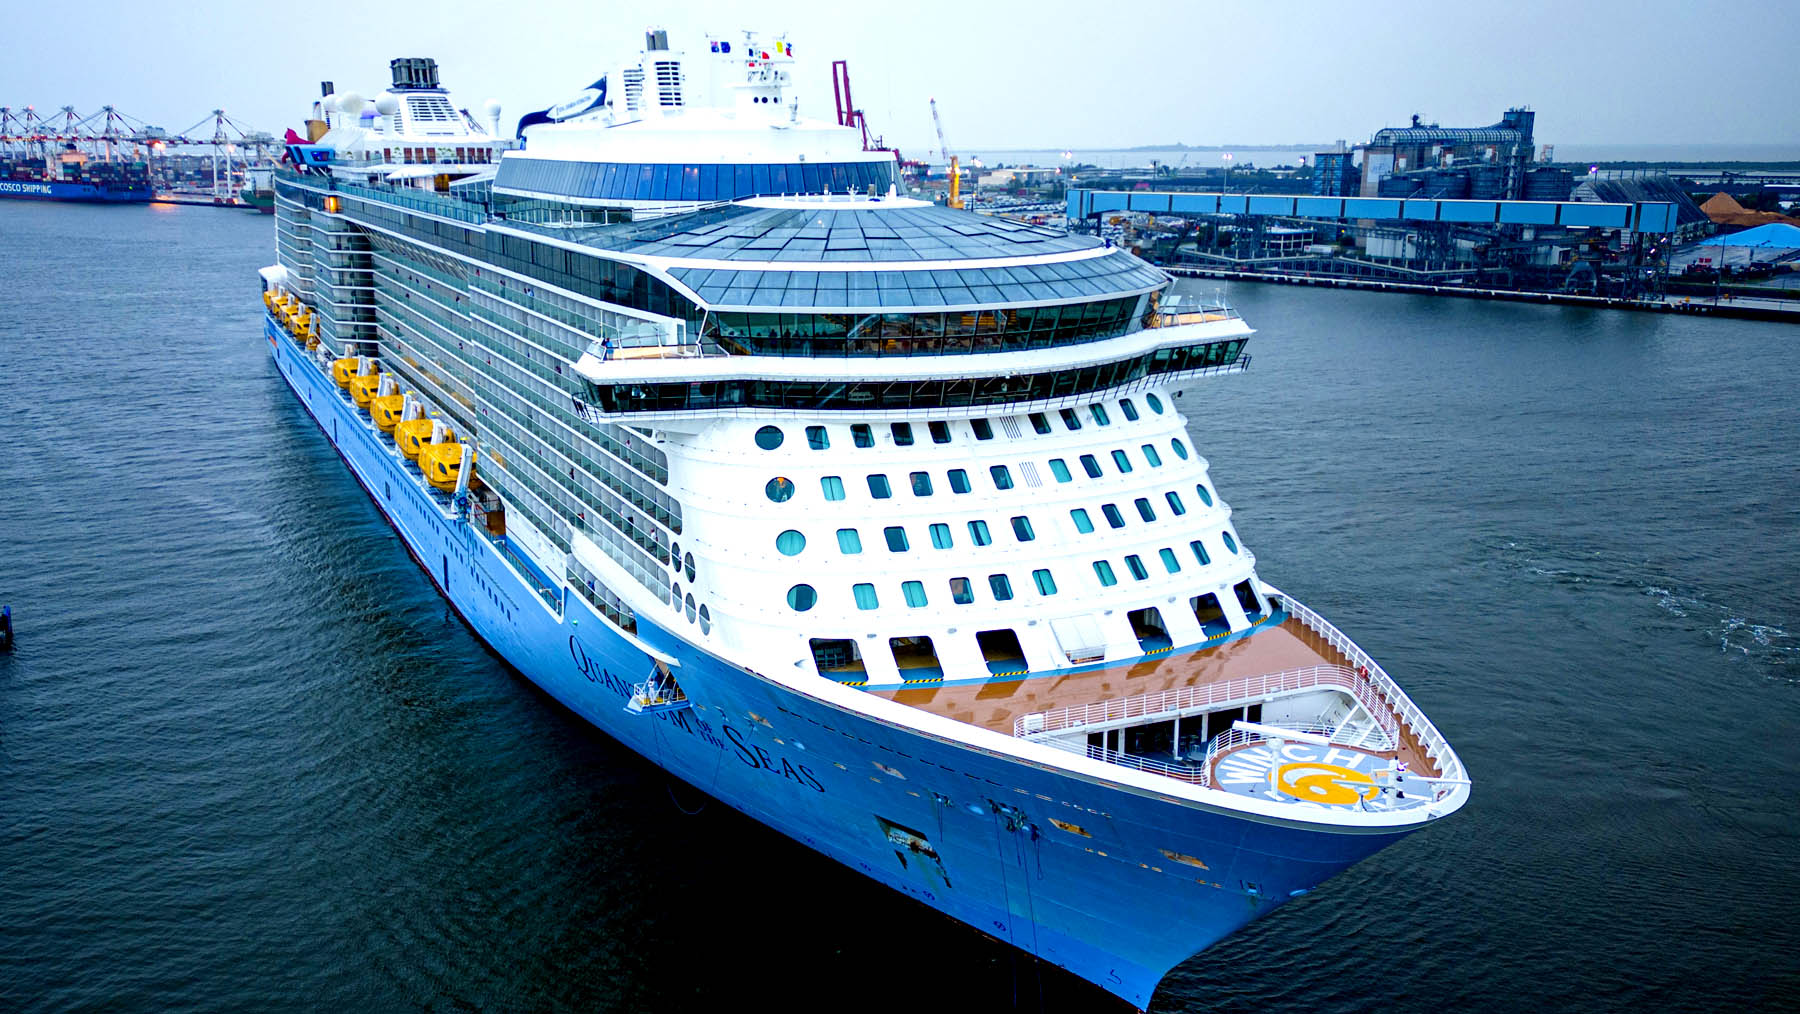 Quantum of the Seas sets for repositioning cruise from Australia